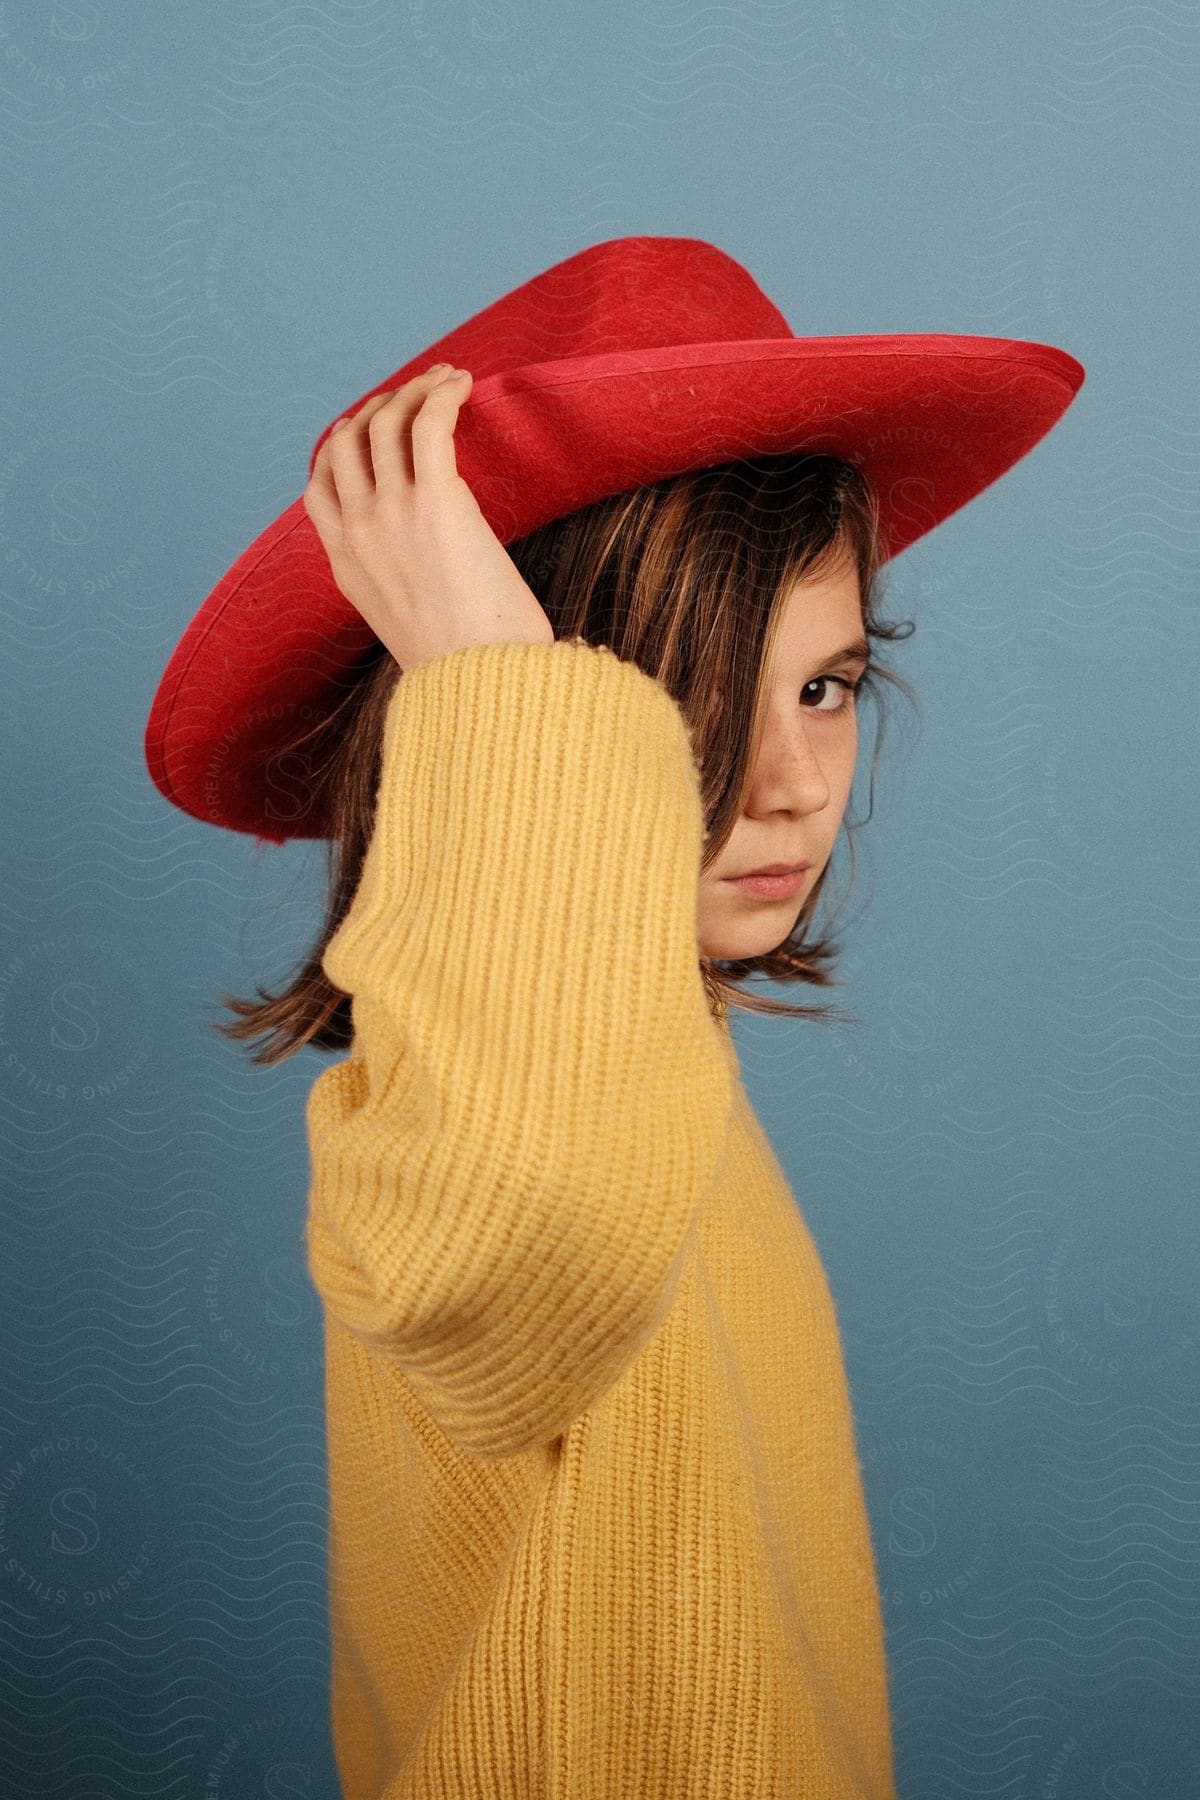 A child in a red hat posing on a blue background